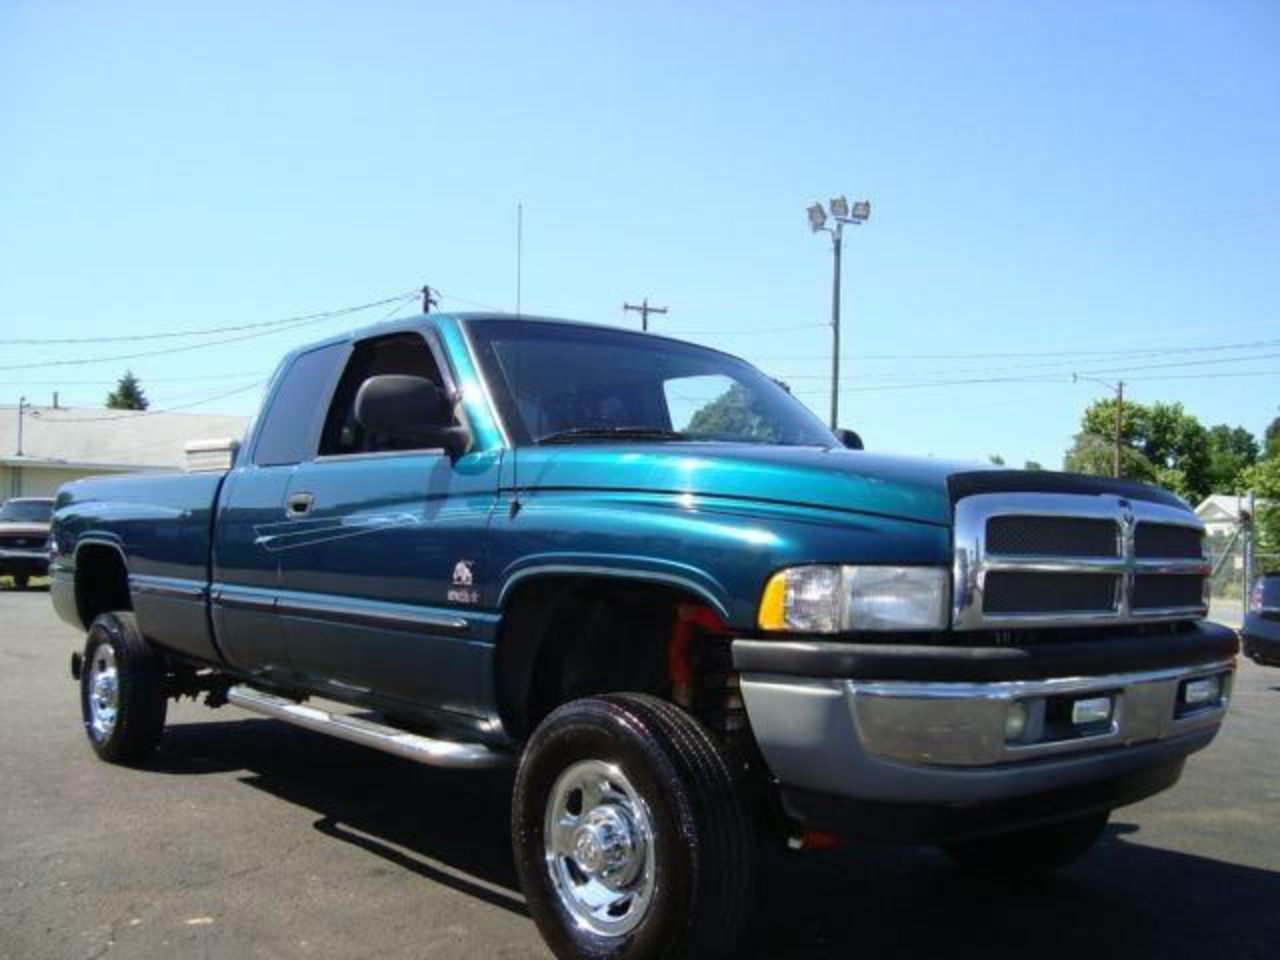 Dodge RAM 2500 Extended Cab Diesel. View Download Wallpaper. 640x480